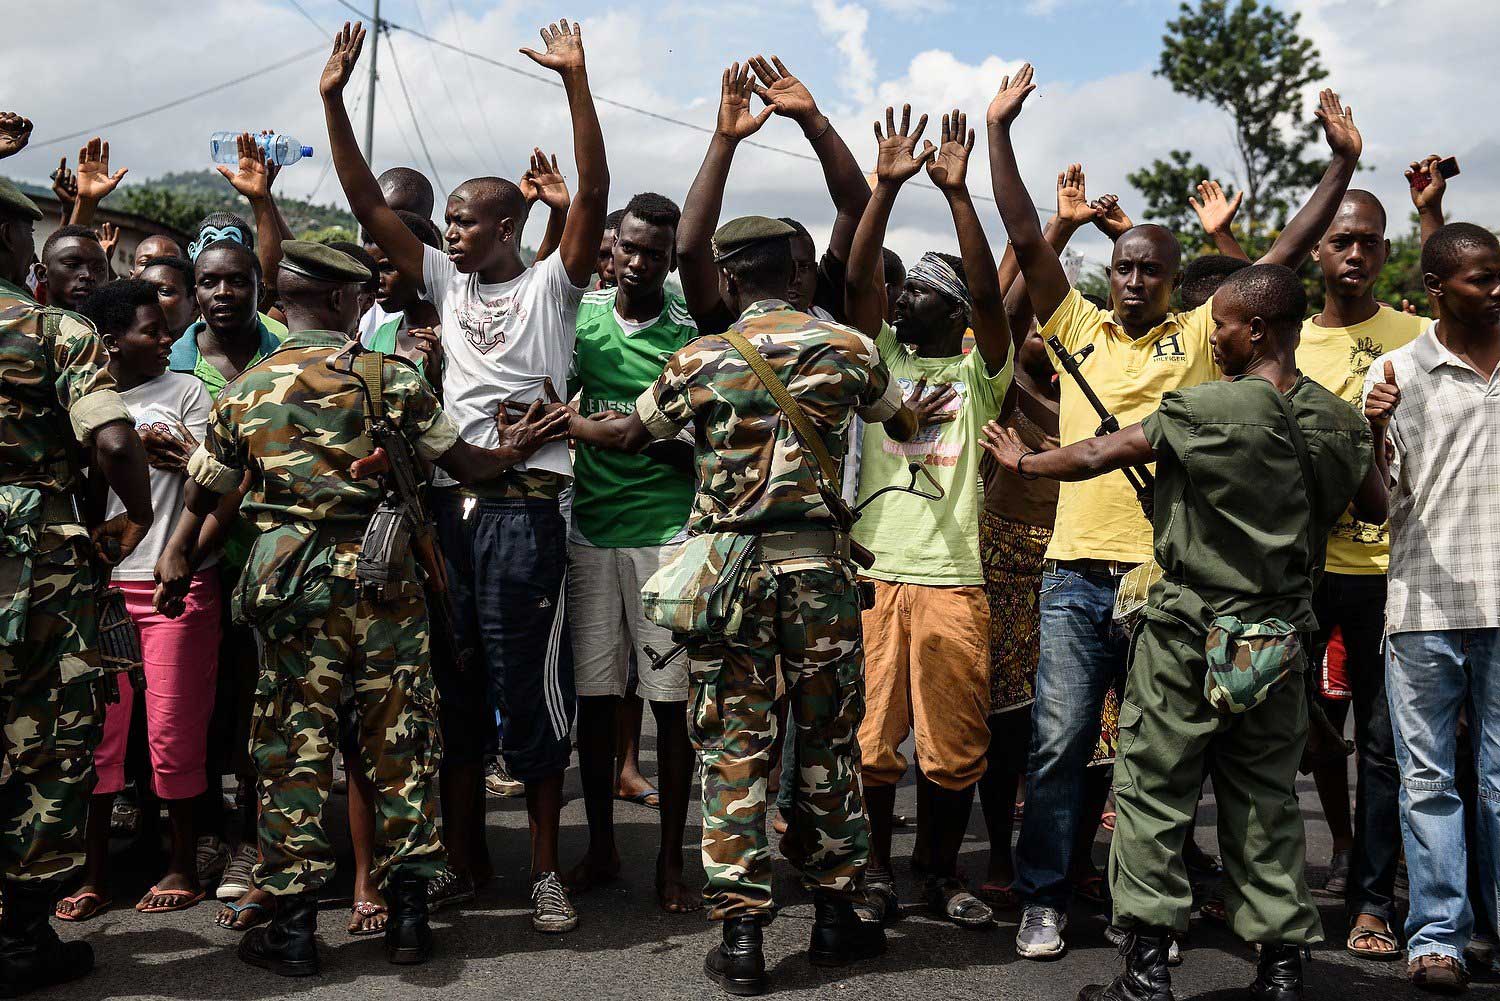 Burundi's army forces hold protestors during a demonstration against incumbent president Pierre Nkurunziza's bid for a 3rd term in Bujumbura, Burundi on May 13, 2015.